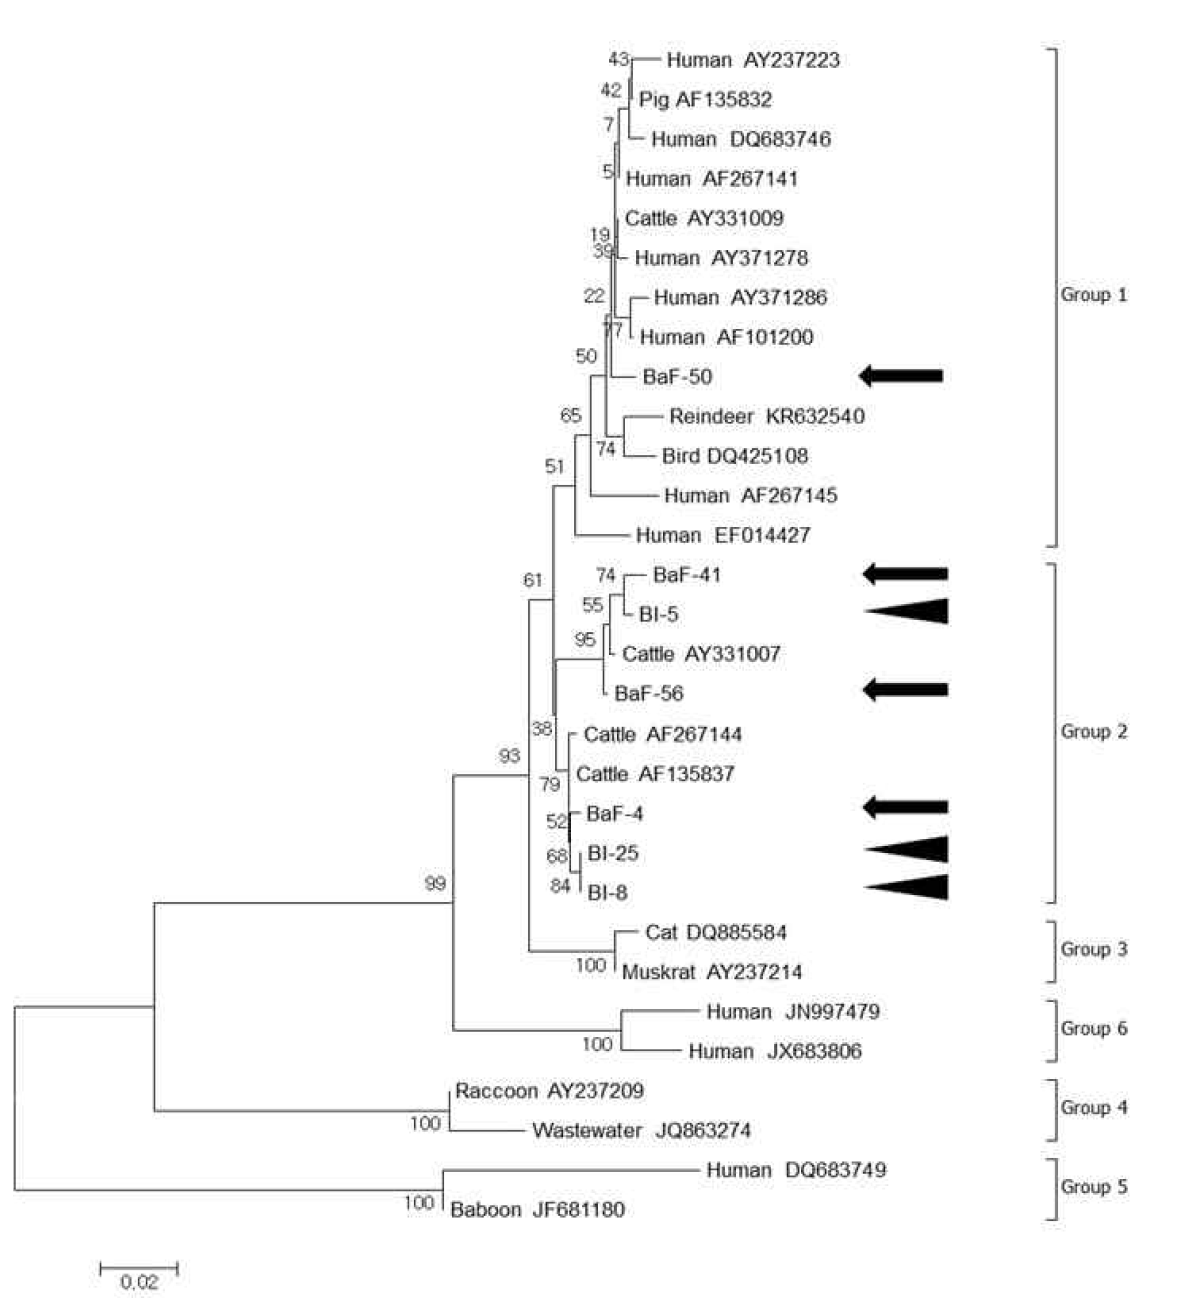 Phylogenetic relationships among Enterocytozoon bieneusi isolates according to Intestine 40 3 (7.5%) 0 0 the neighbor-joining analysis of ITS region. E. bieneusi ITS sequences obtained from bat feces and intestines are marked with arrows and arrowheads, respectively.